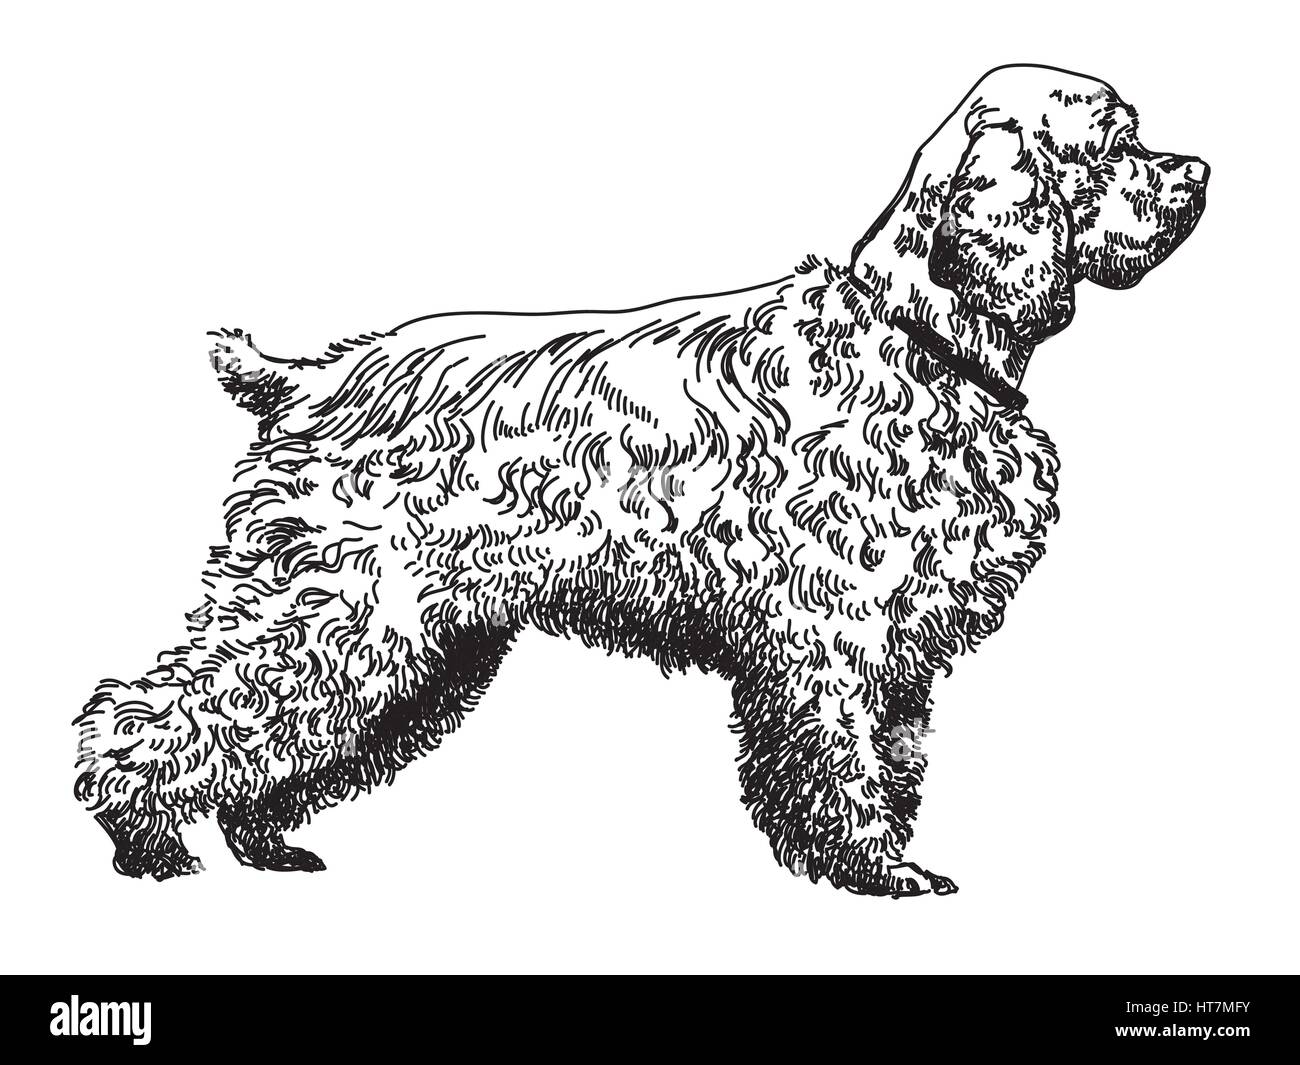 Spaniel vector hand drawing illustration in black and white Stock Vector